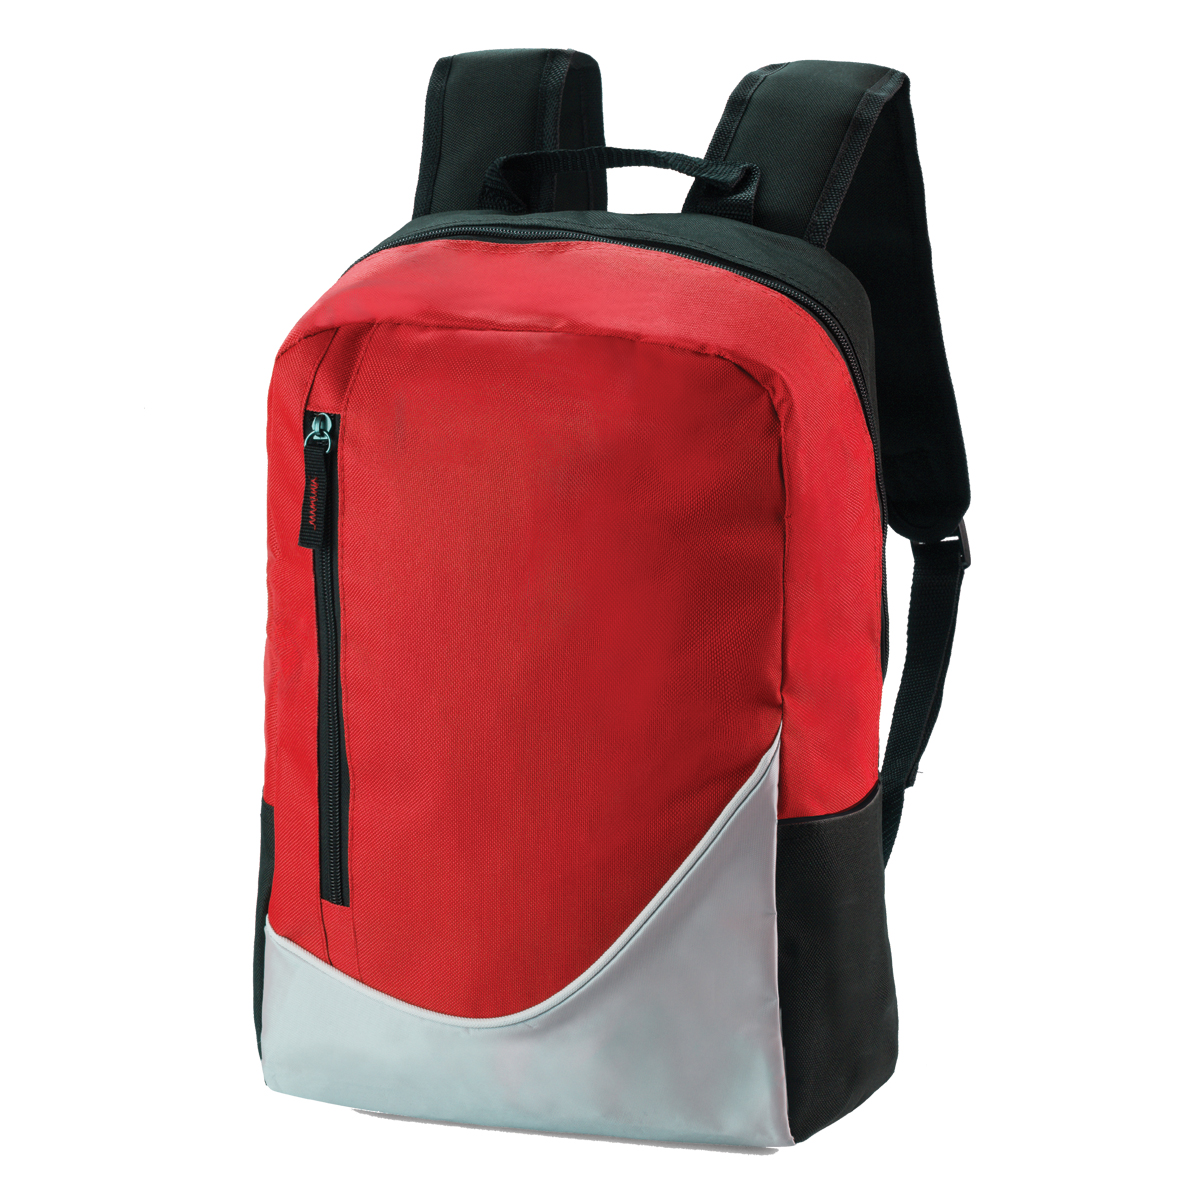 Contrast Backpack Product Image